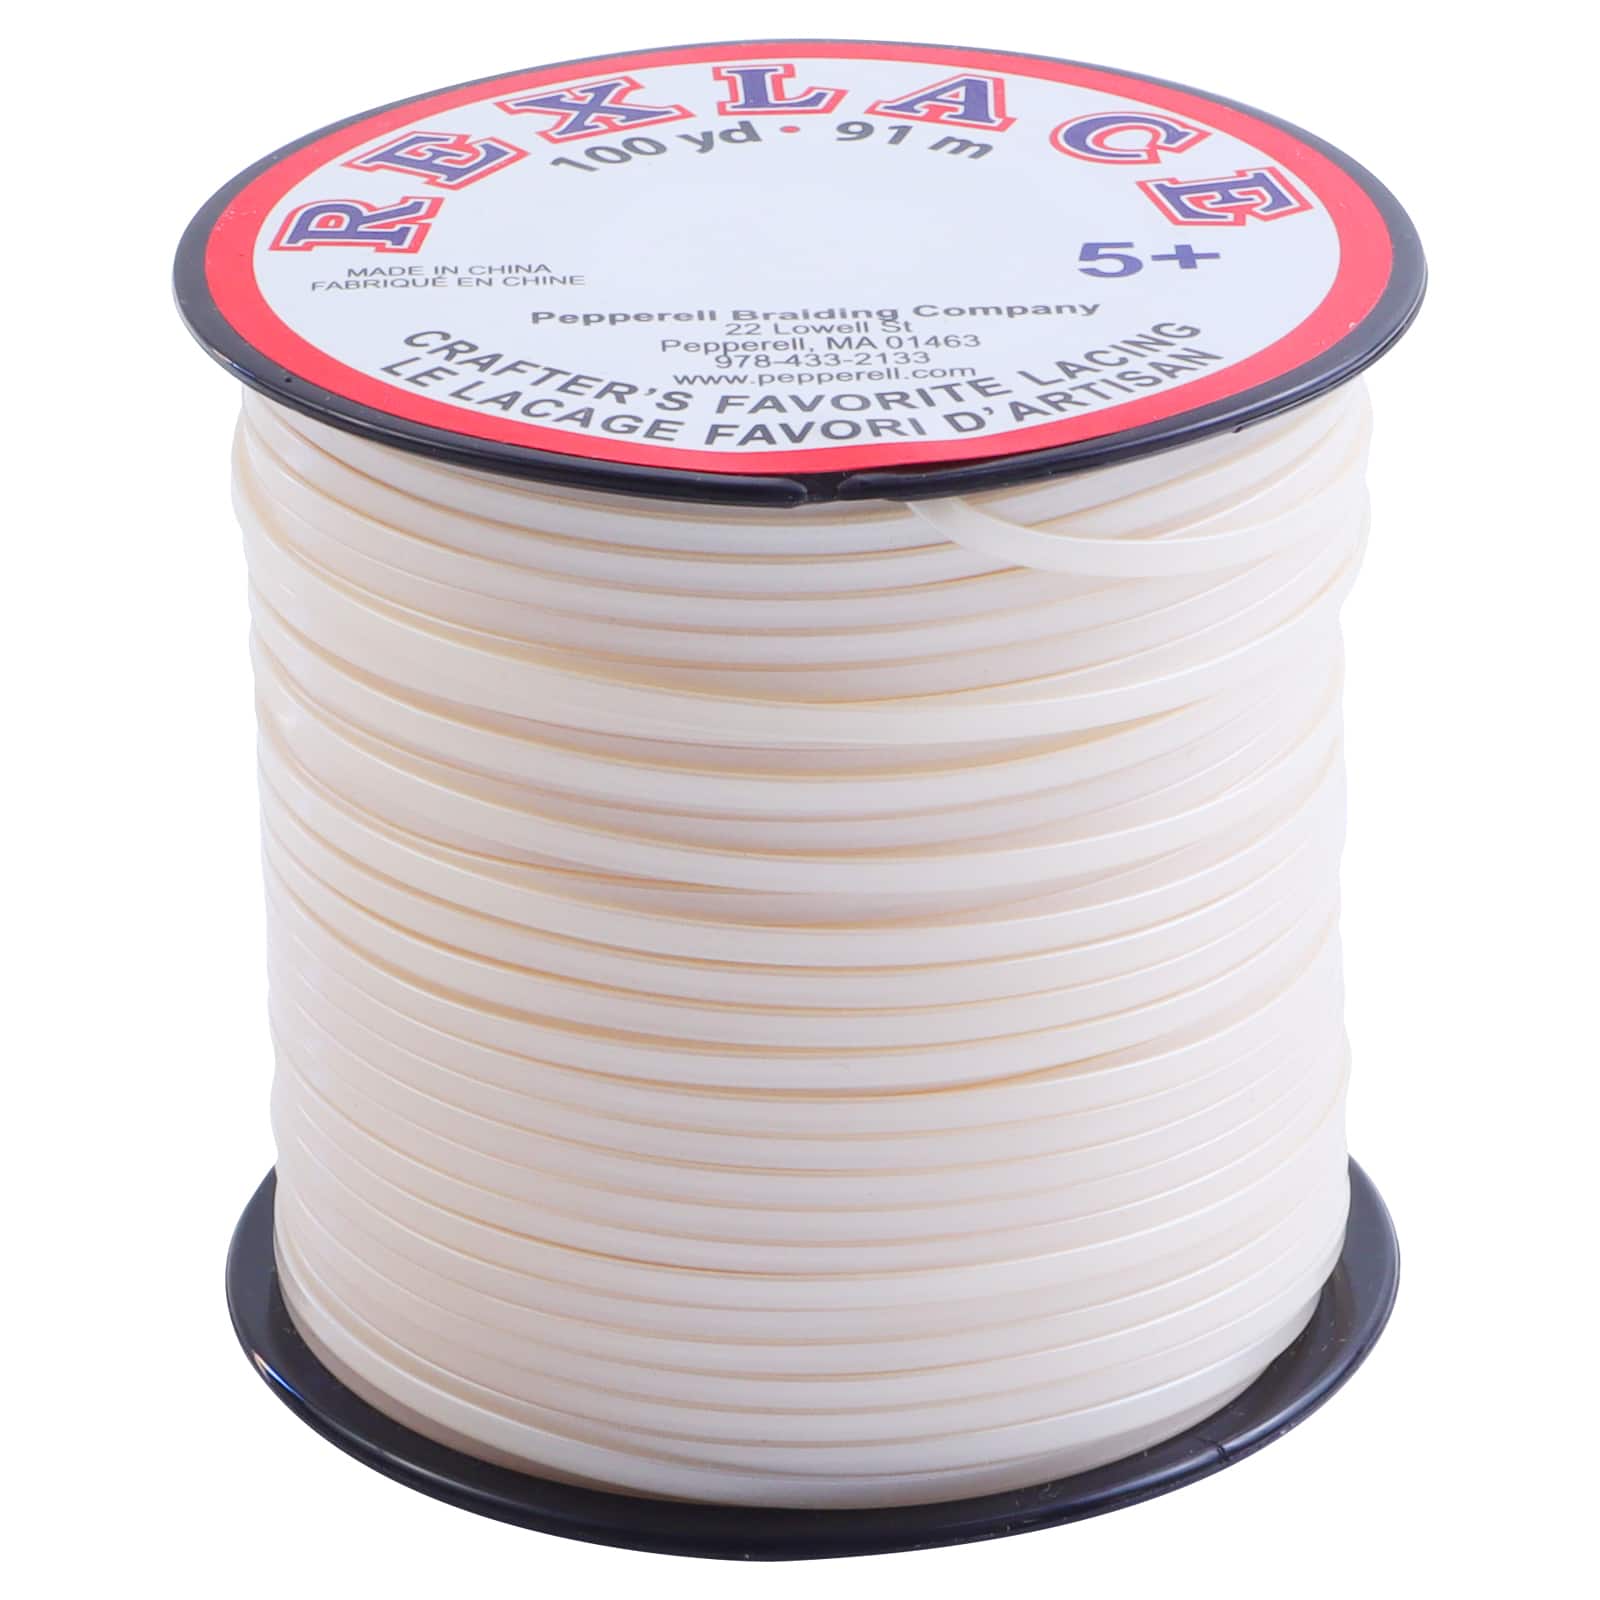 Rexlace Pearlized Pearl Lacing - 100 yd